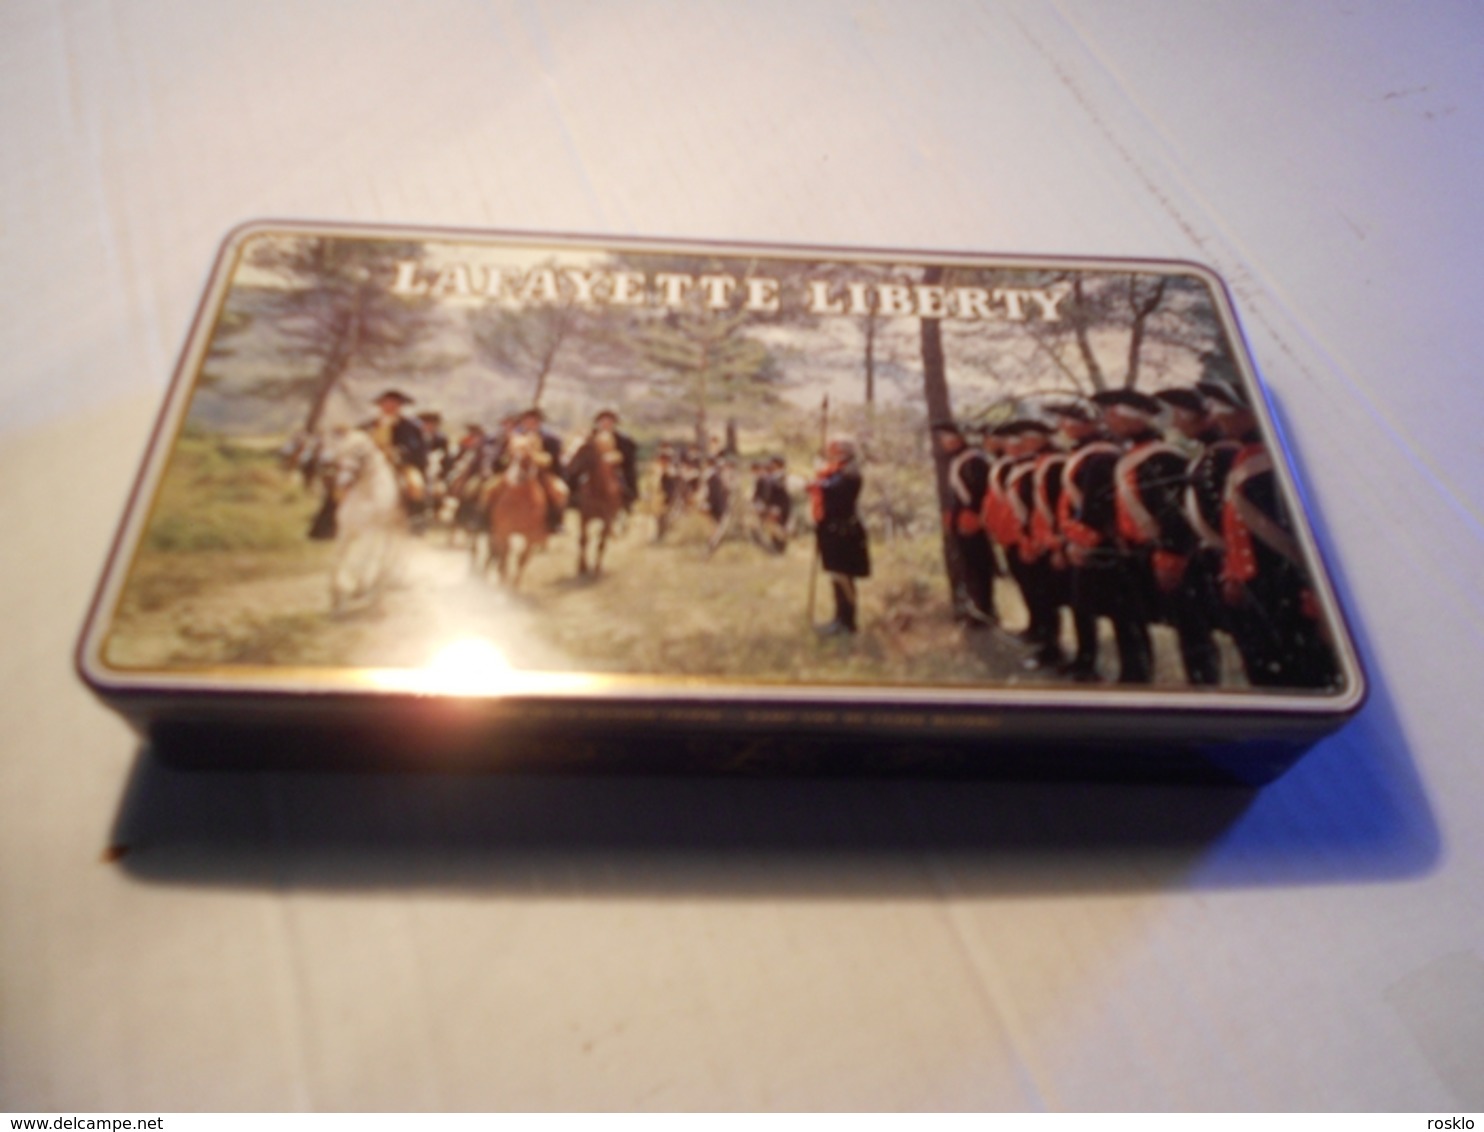 ANCIENNE-BOITE-a-biscuits-S-A-JUBILE-N-V-LAFAYETTE-LIBER - Scatole